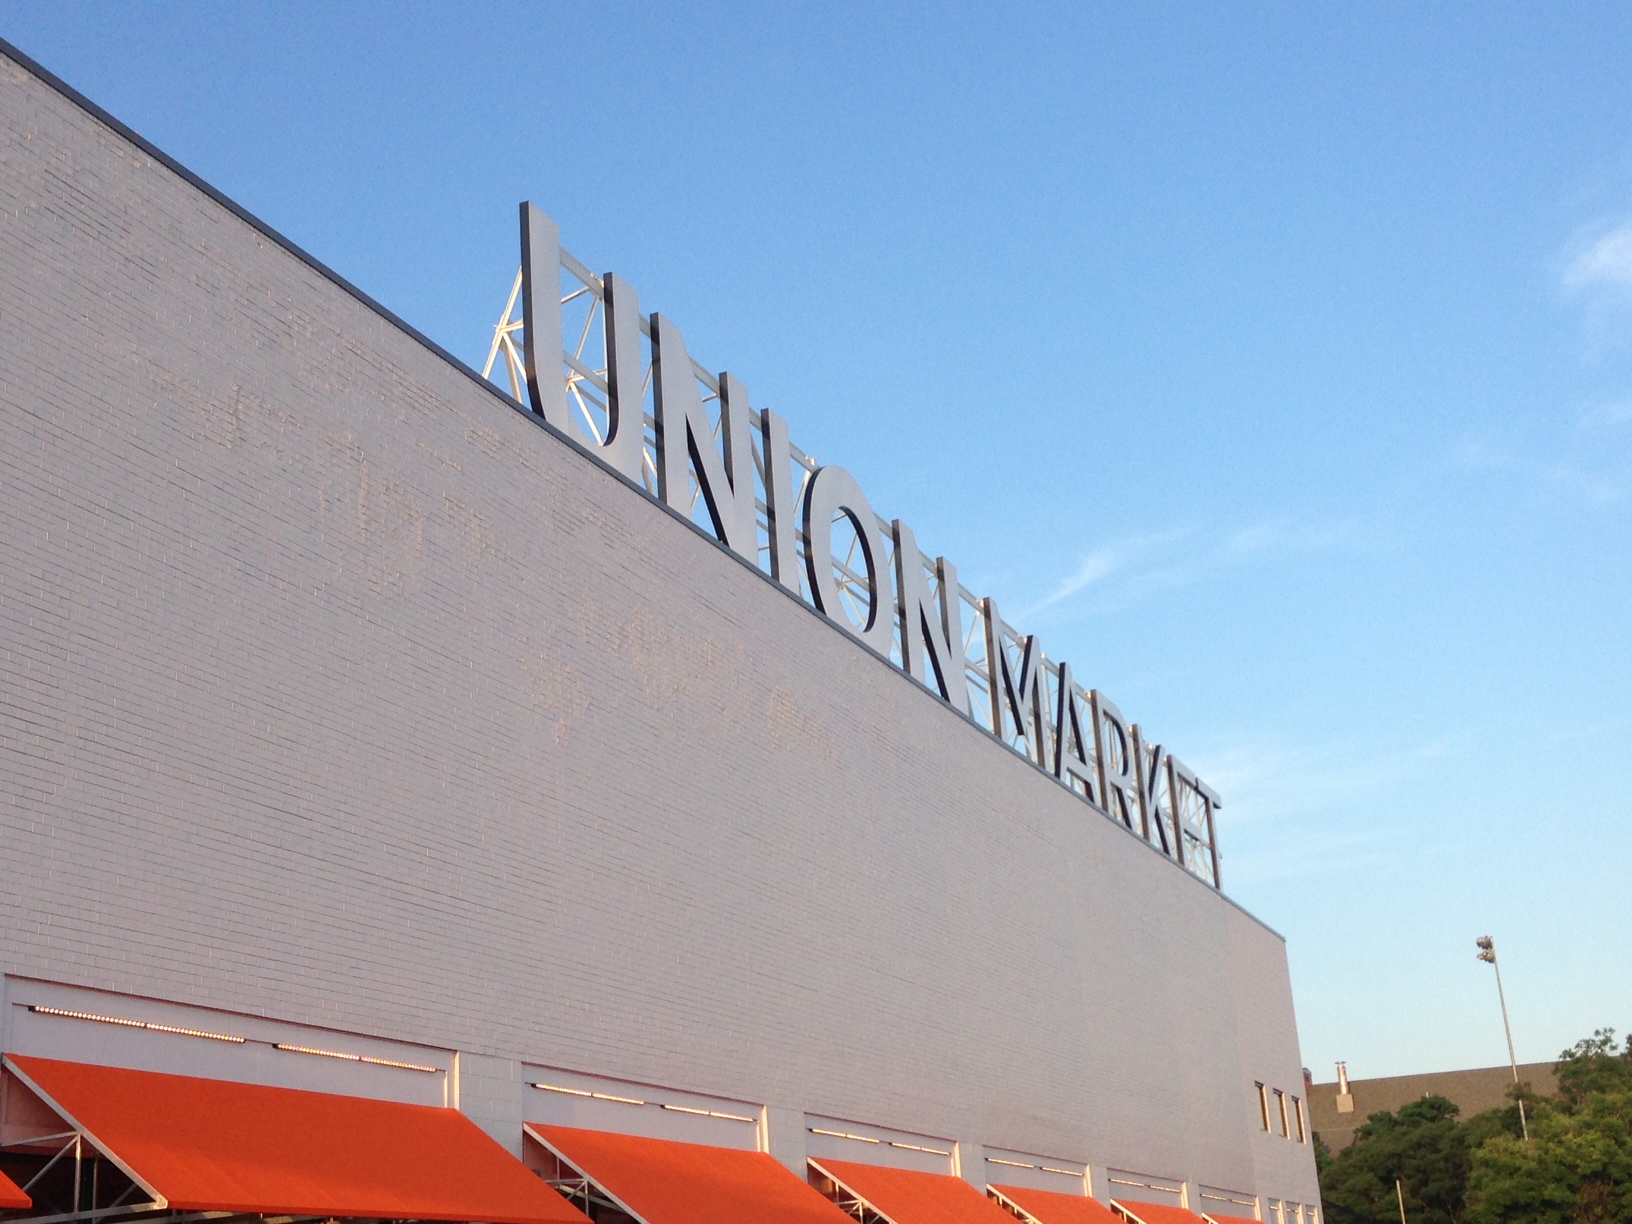 The area around Union Market will be redeveloped. (WTOP/Rachel Nania)